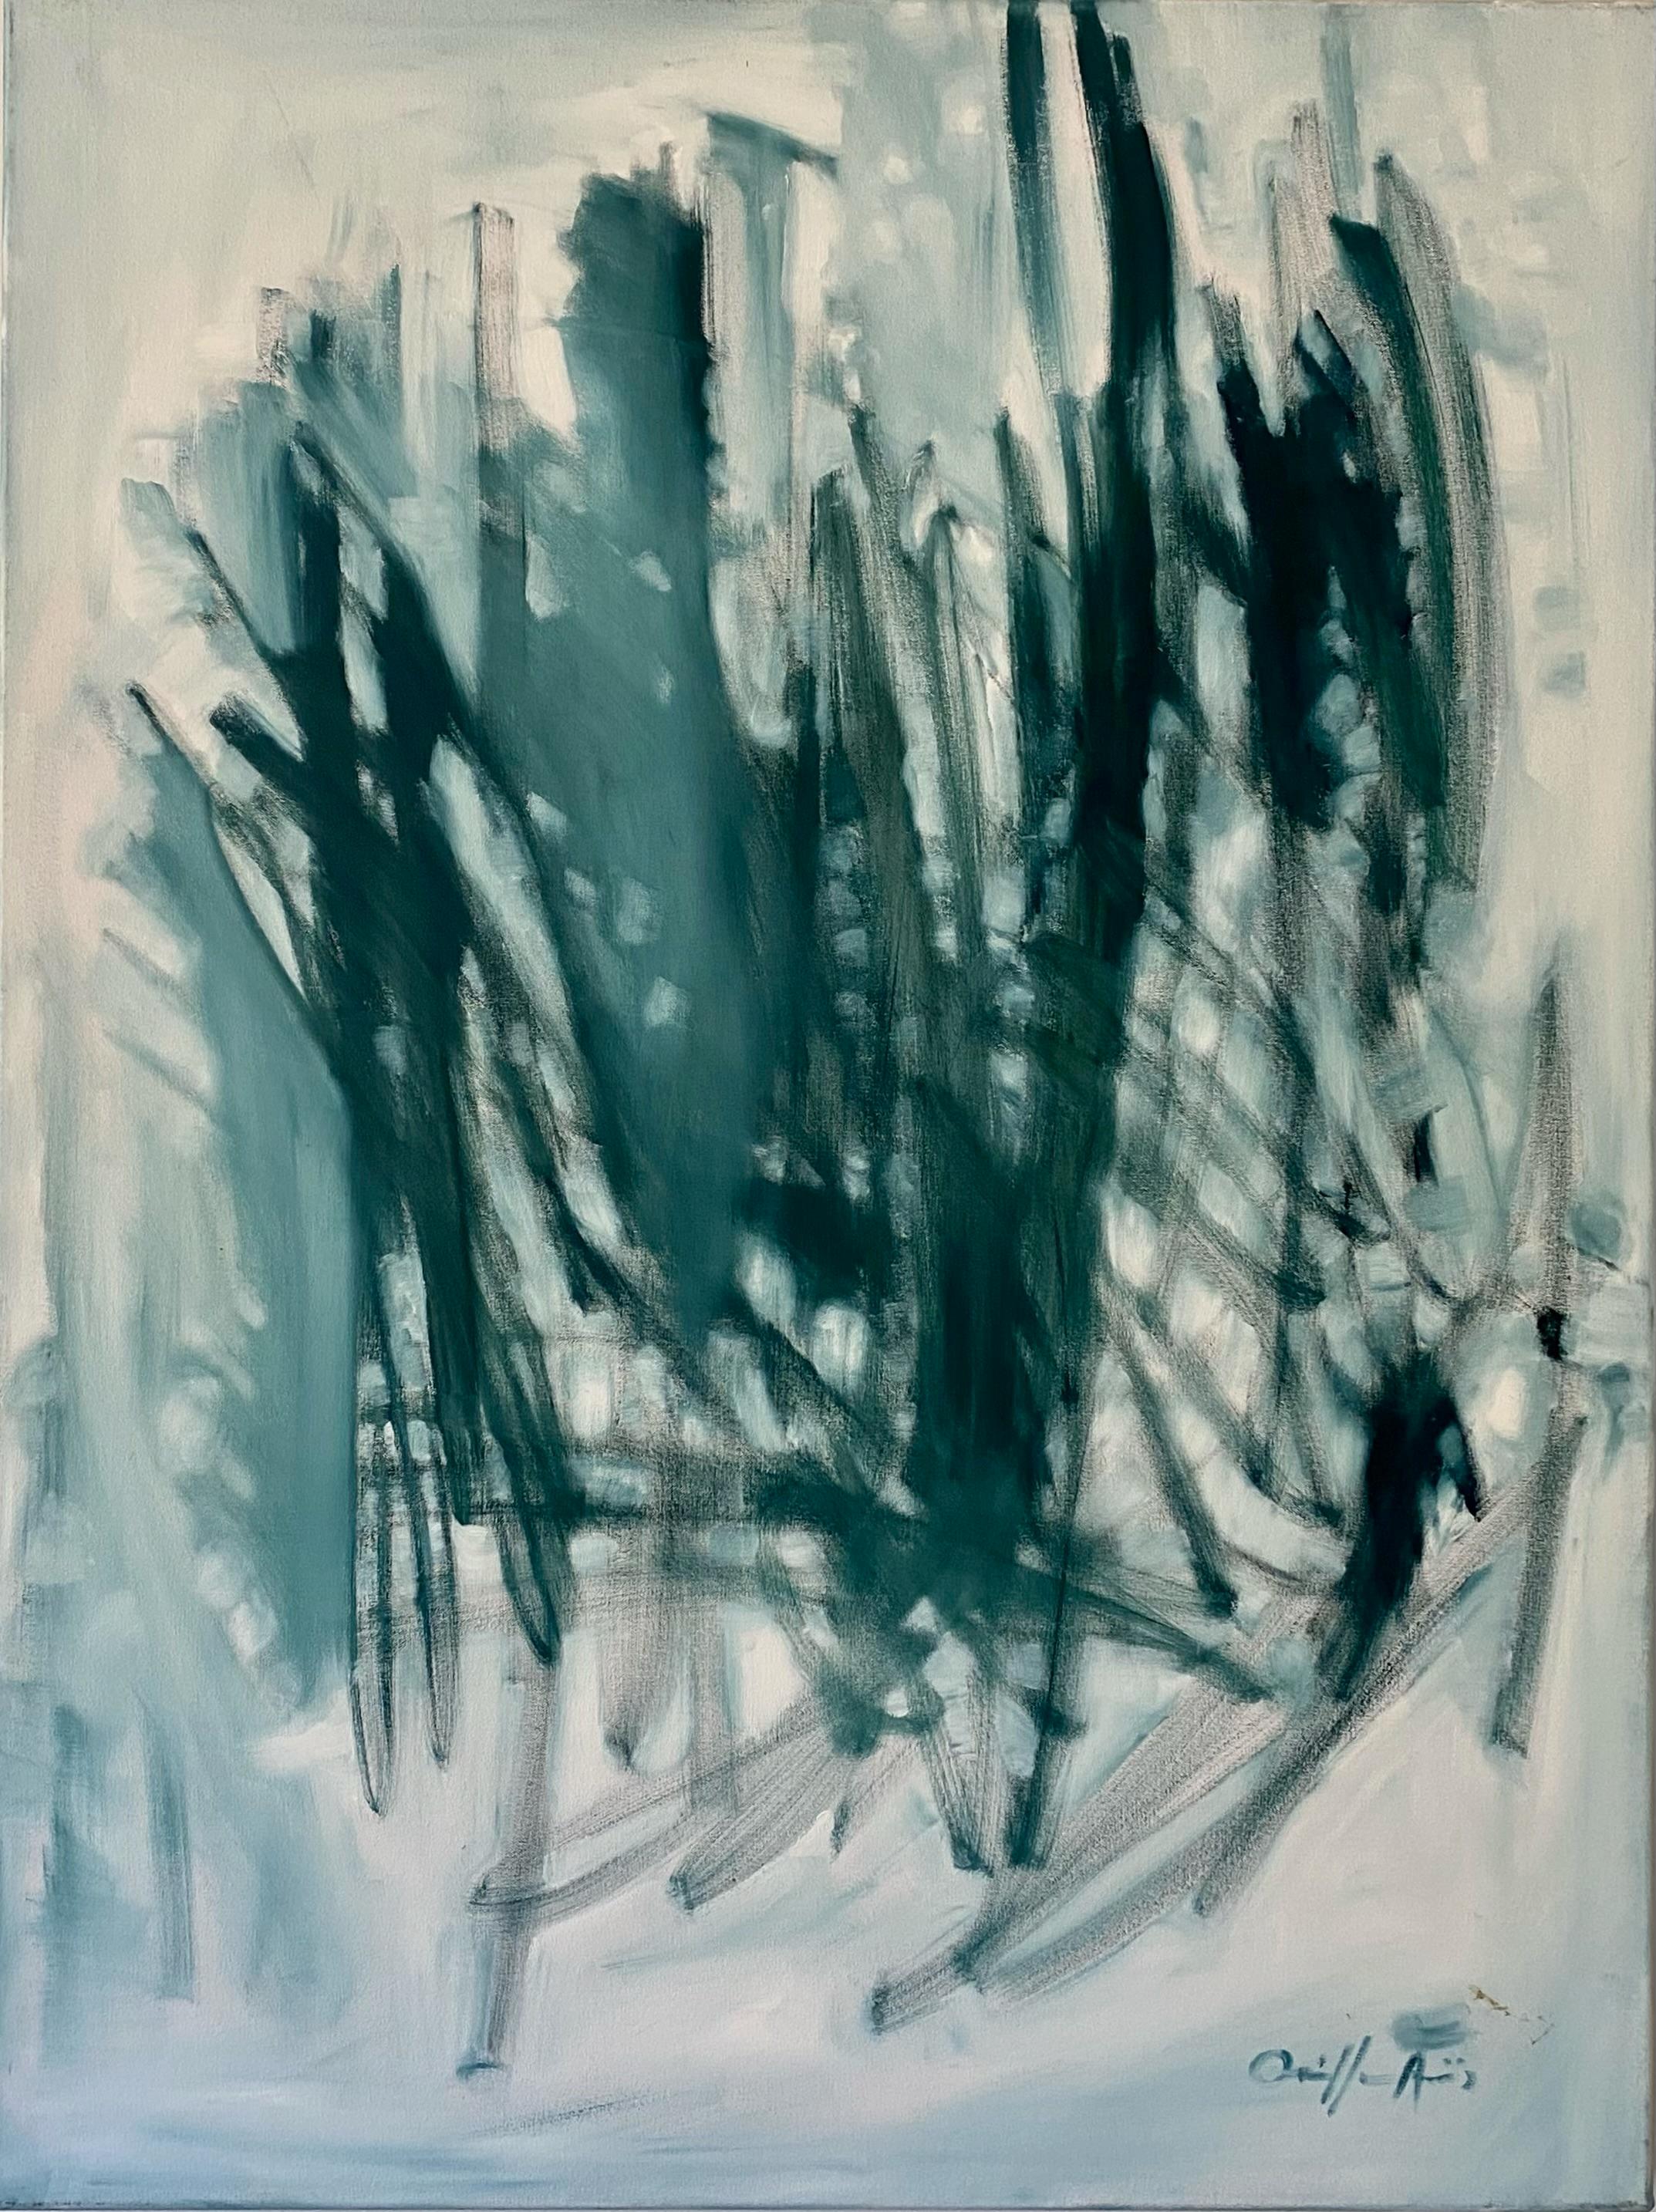 Abstract Painting Orielle Caldwell - « Into The Woods » - Peinture abstraite d'orielle